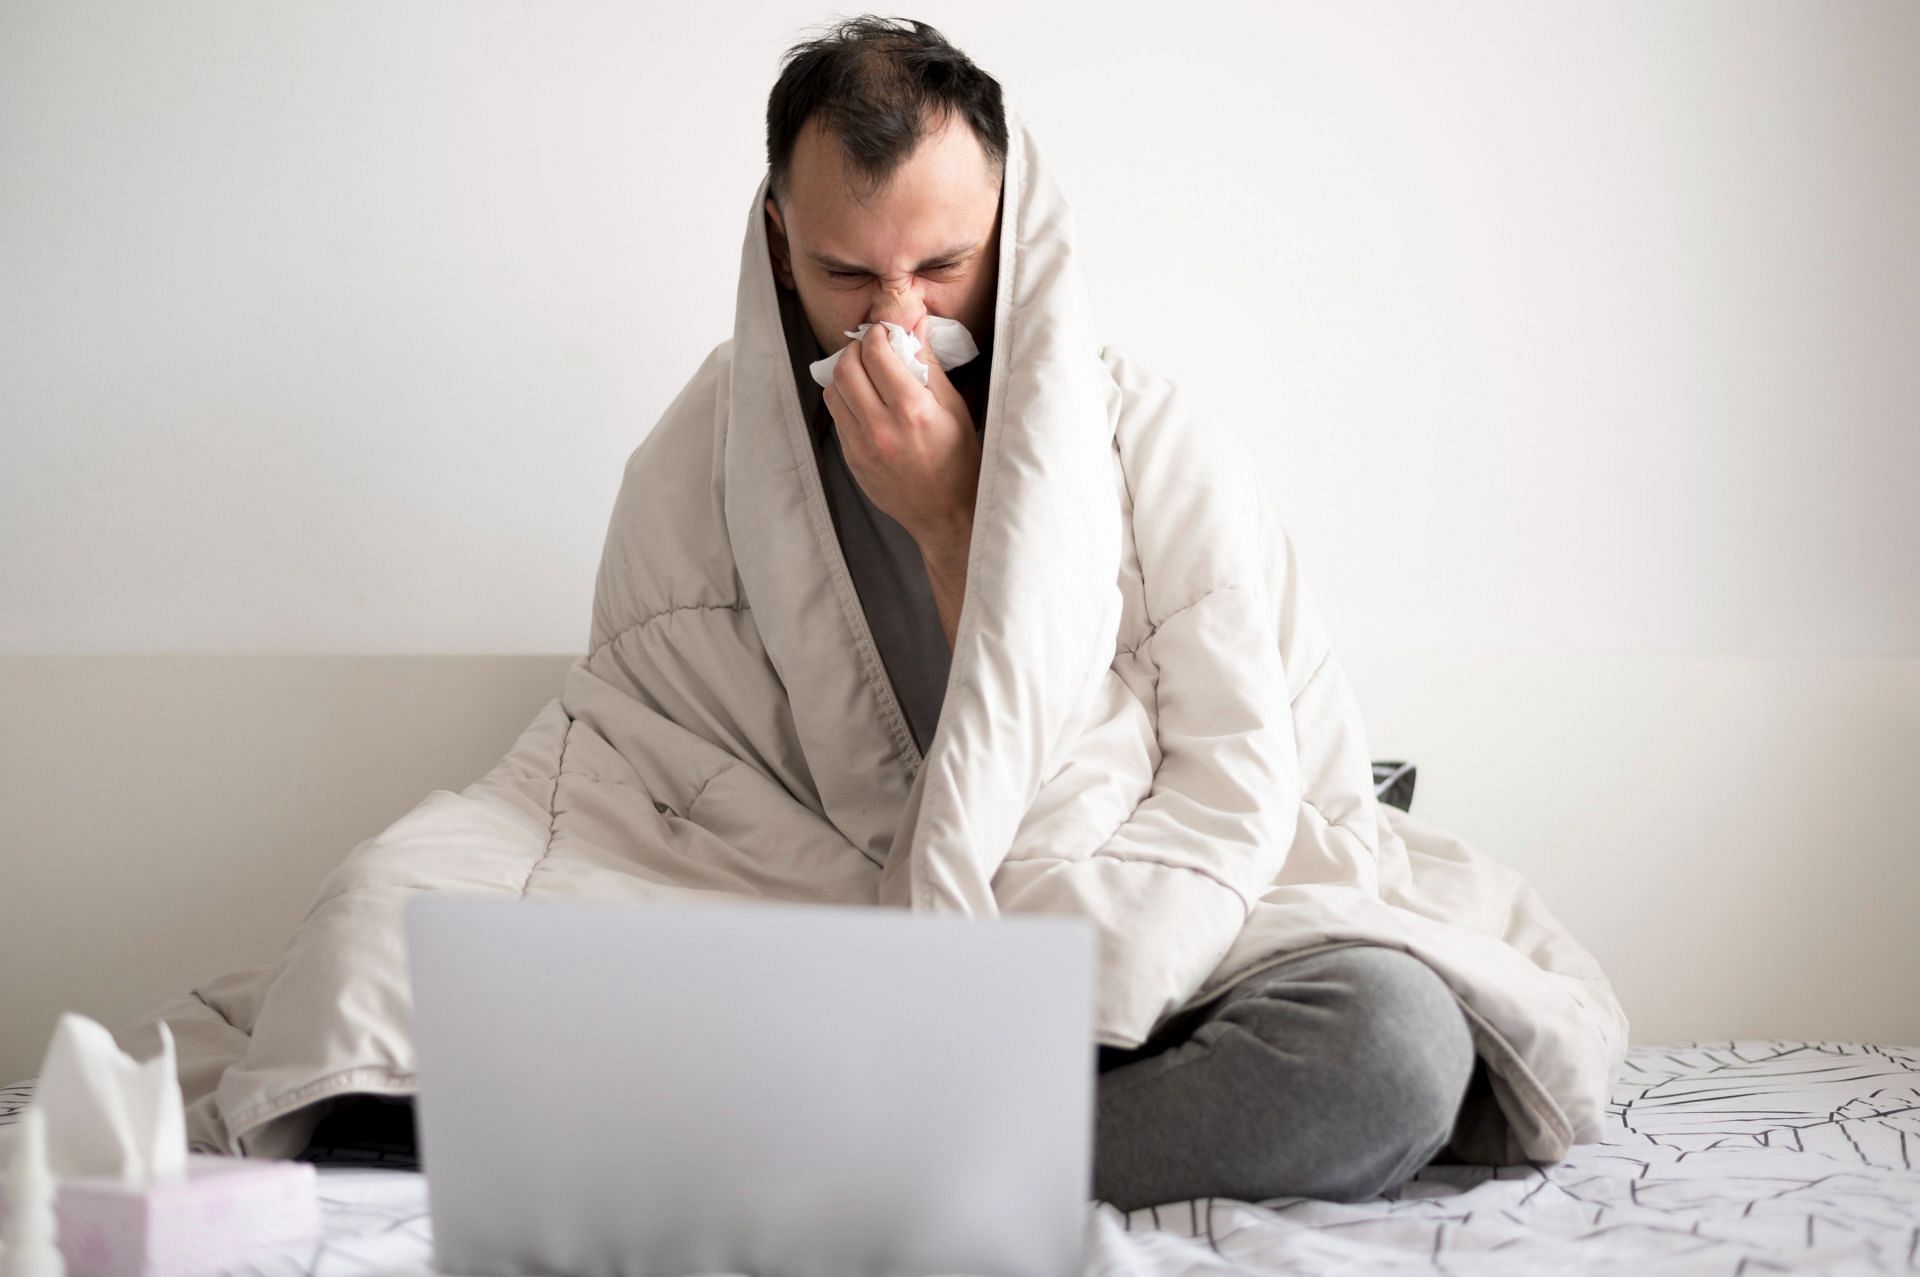 Anyone can fall prey to cyberchondria, especially because of the increased connectivity to the internet. (Image via Freepik/ Freepik)